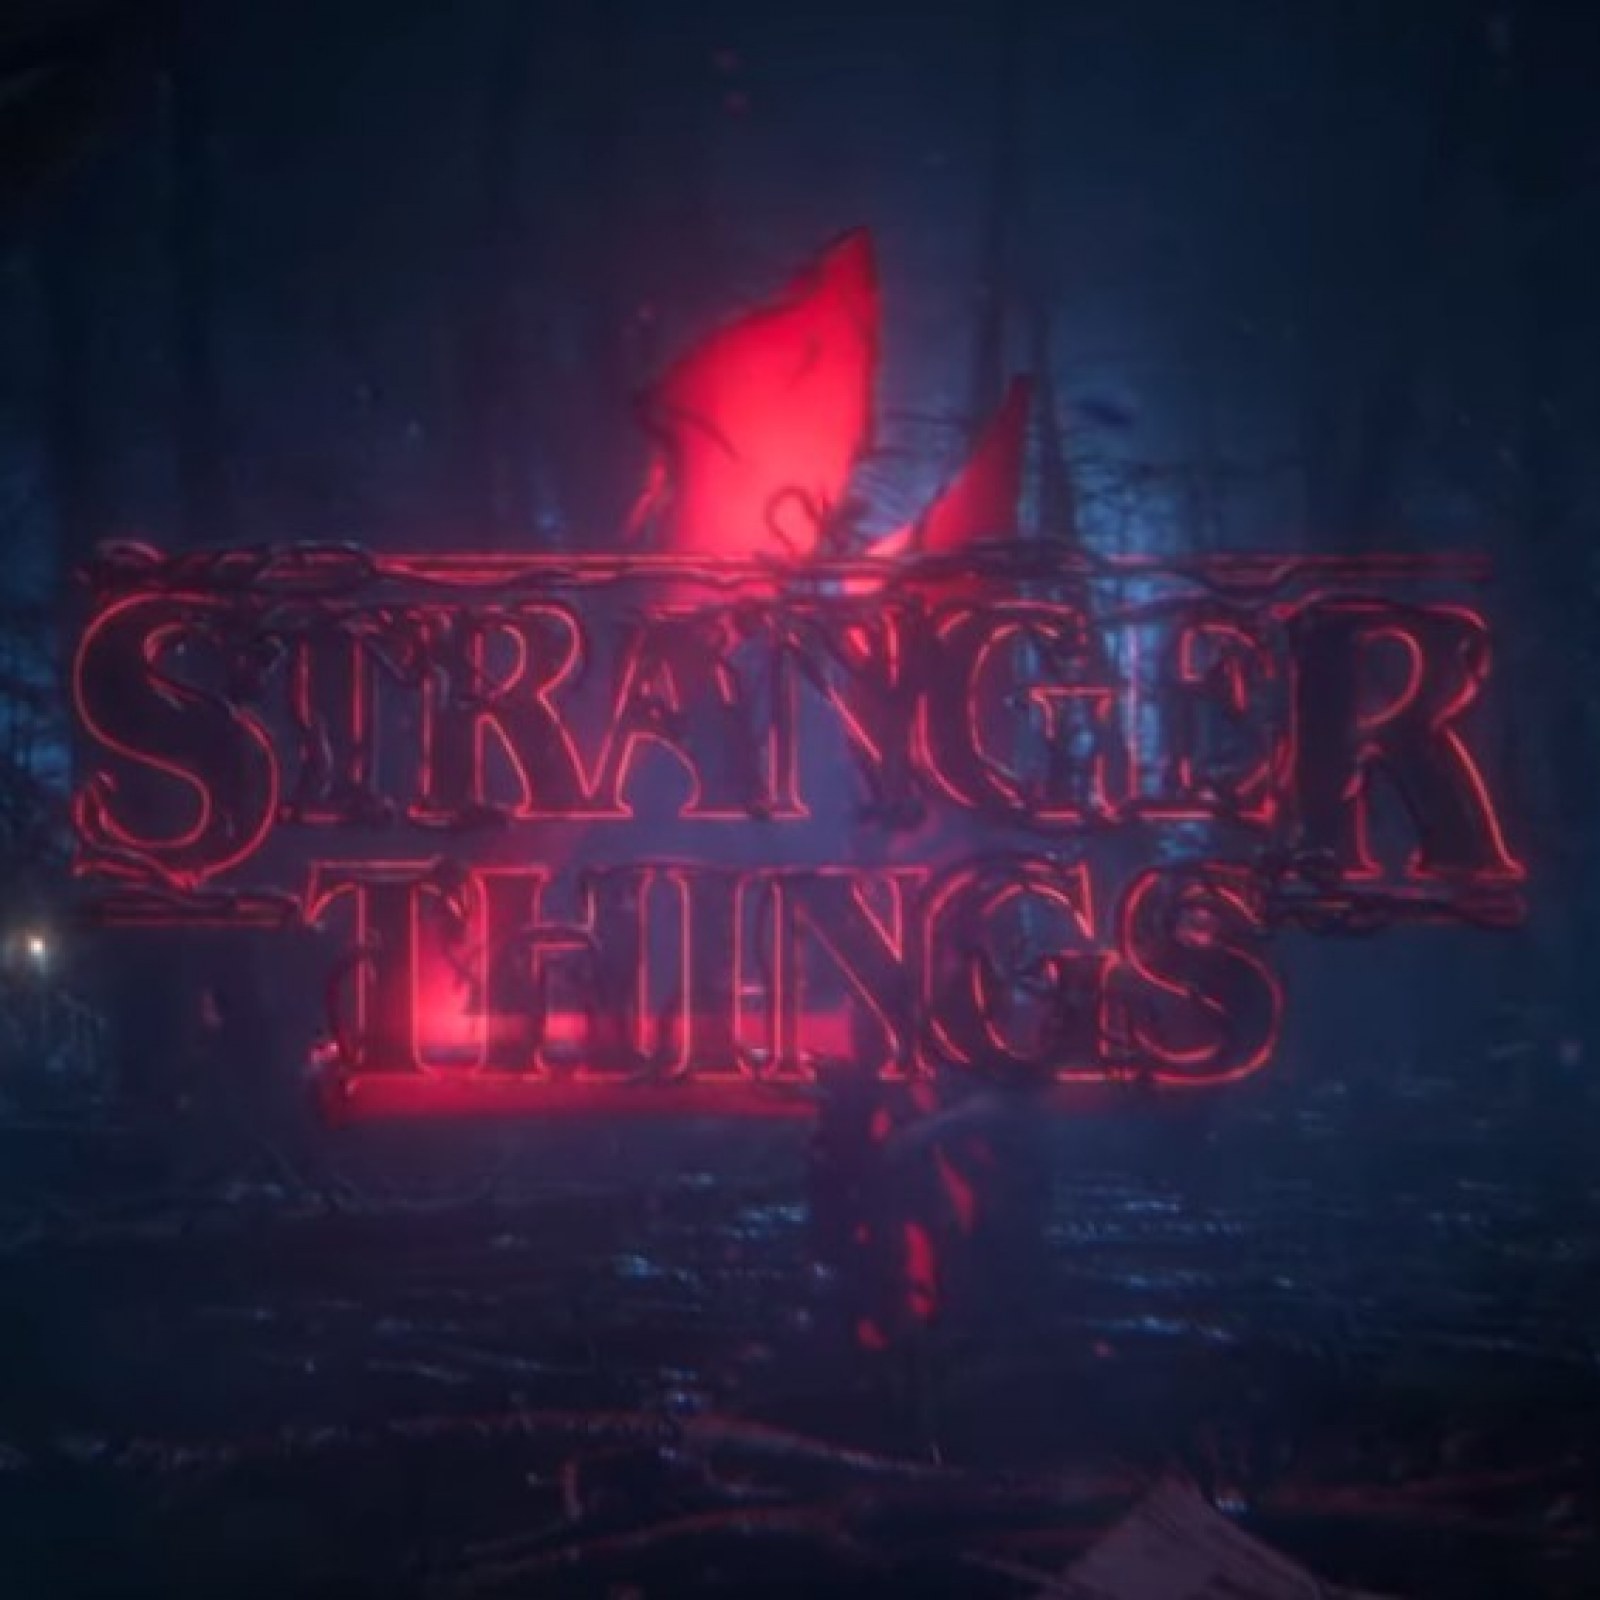 When Does 'Stranger Things' Season 4 Come Out?